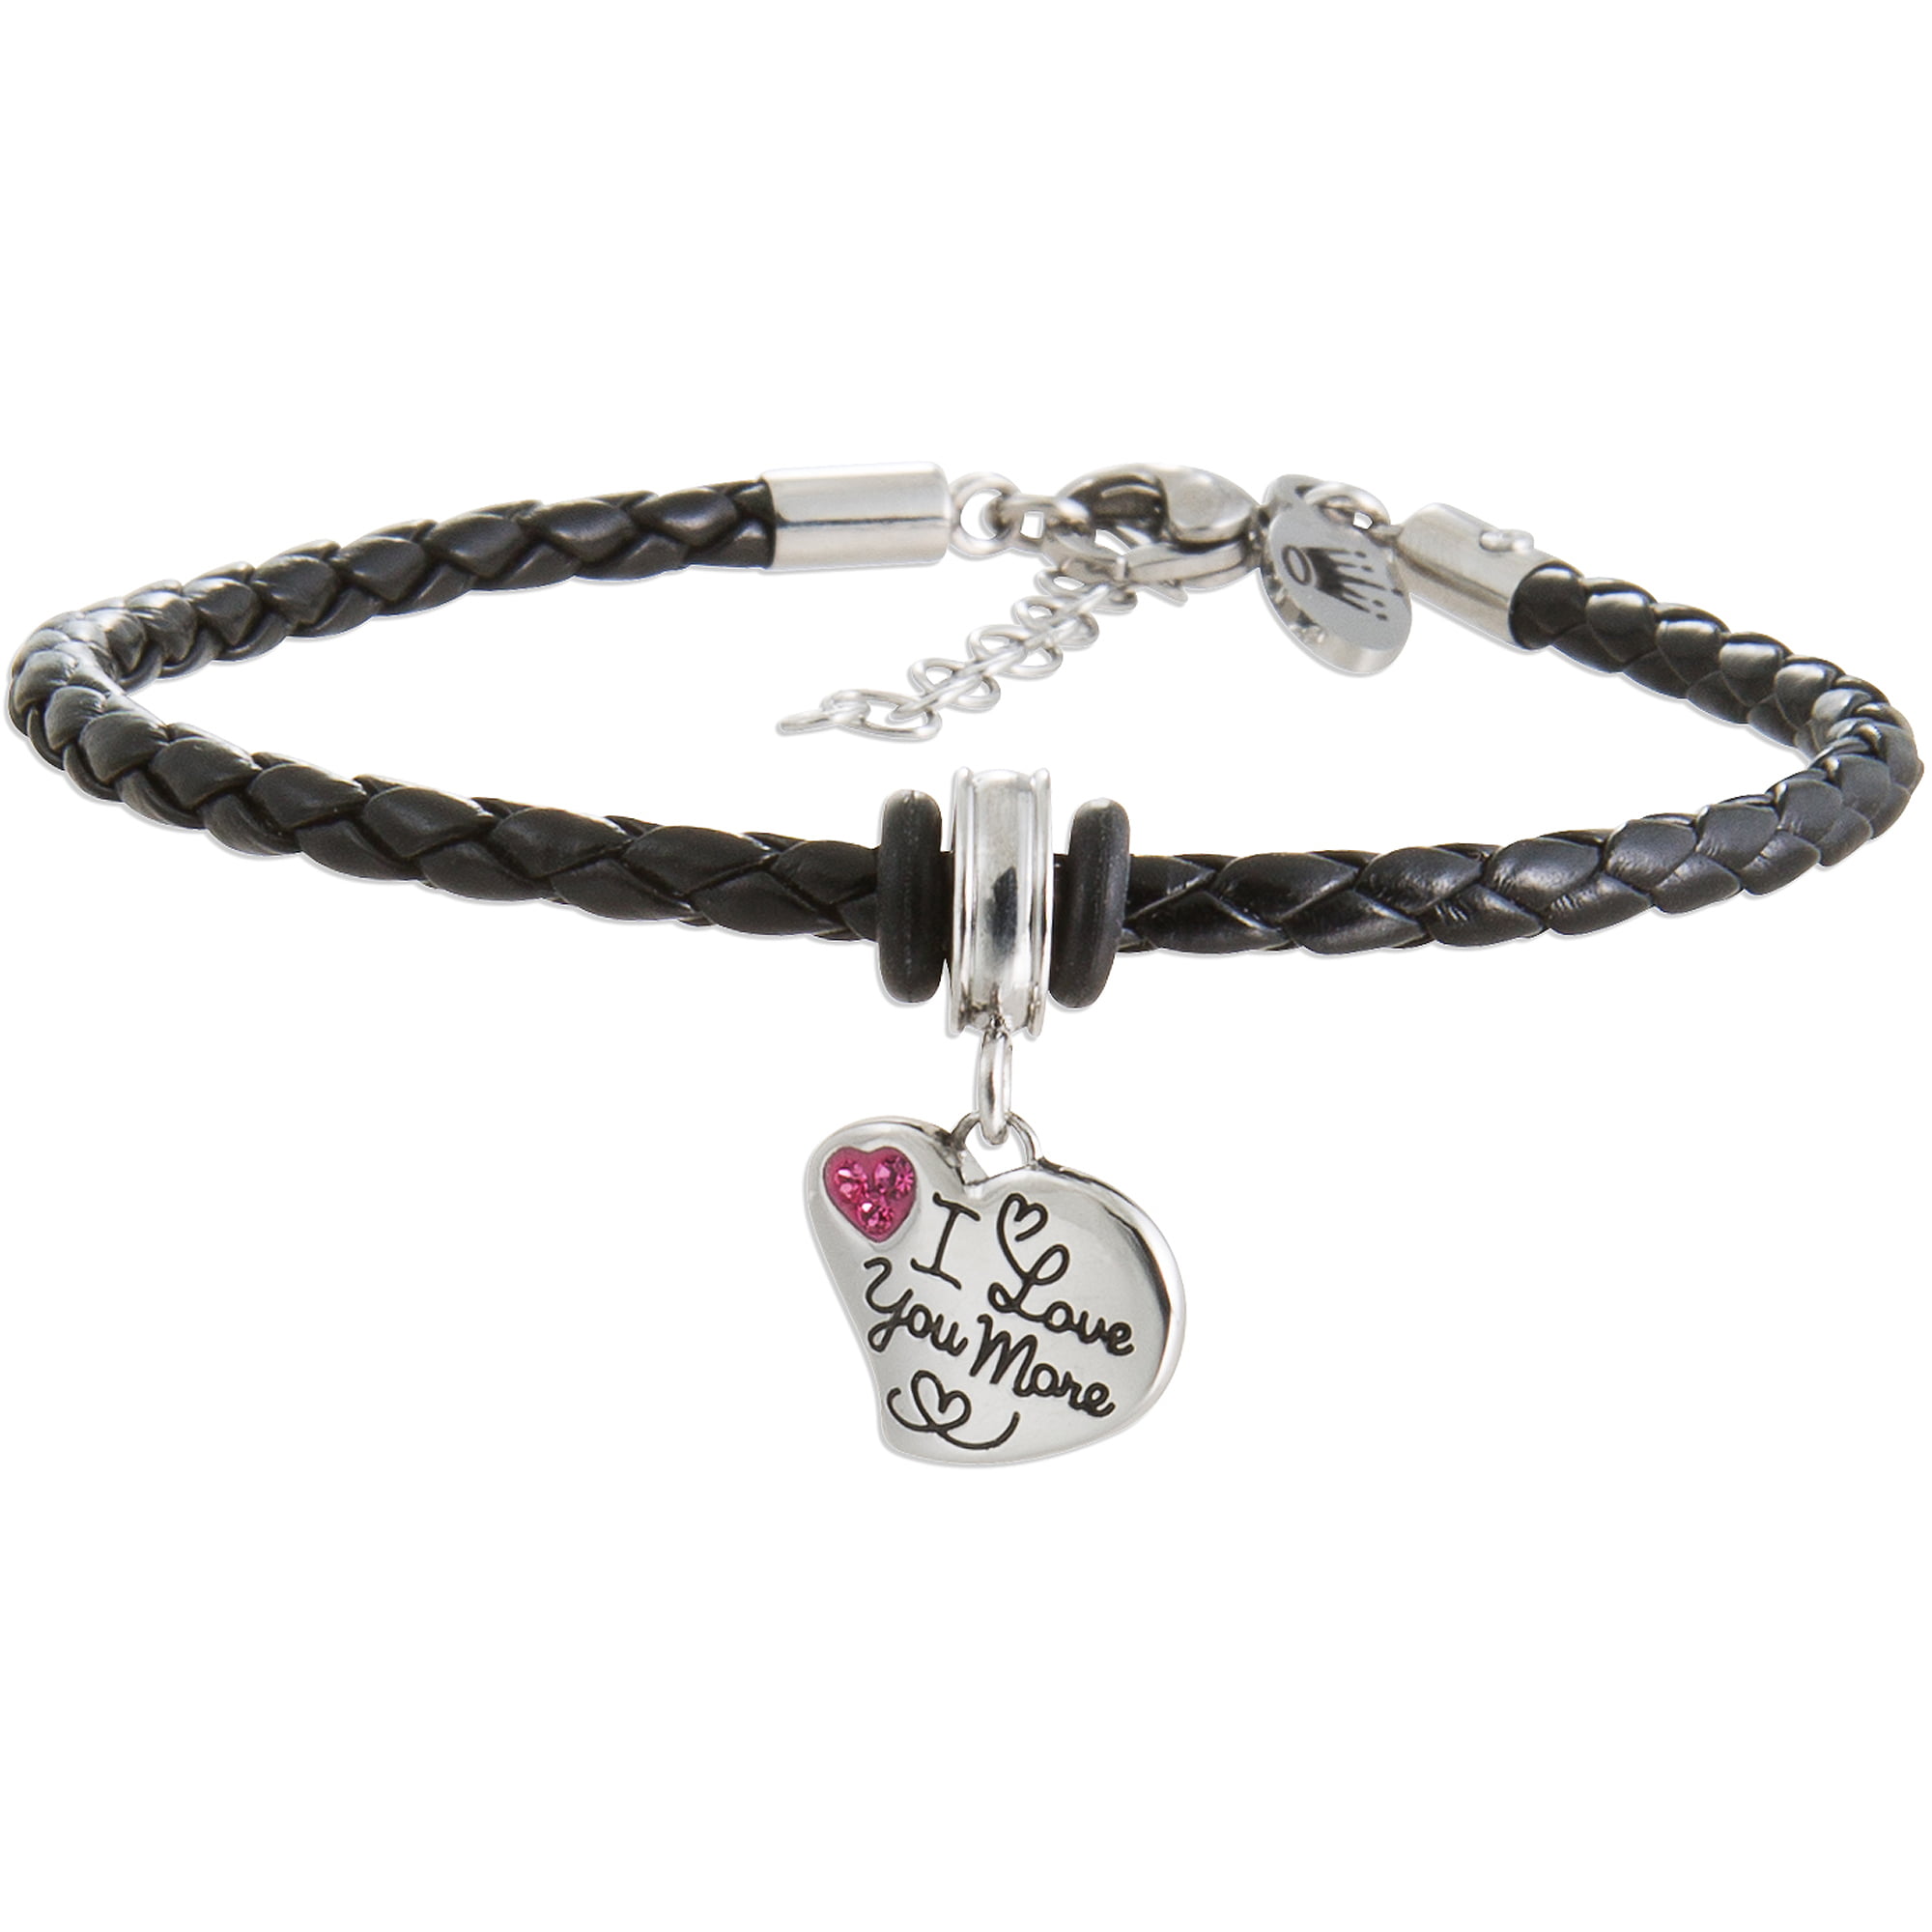 Connections from Hallmark Stainless-Steel Little Girl Charm - Walmart.com